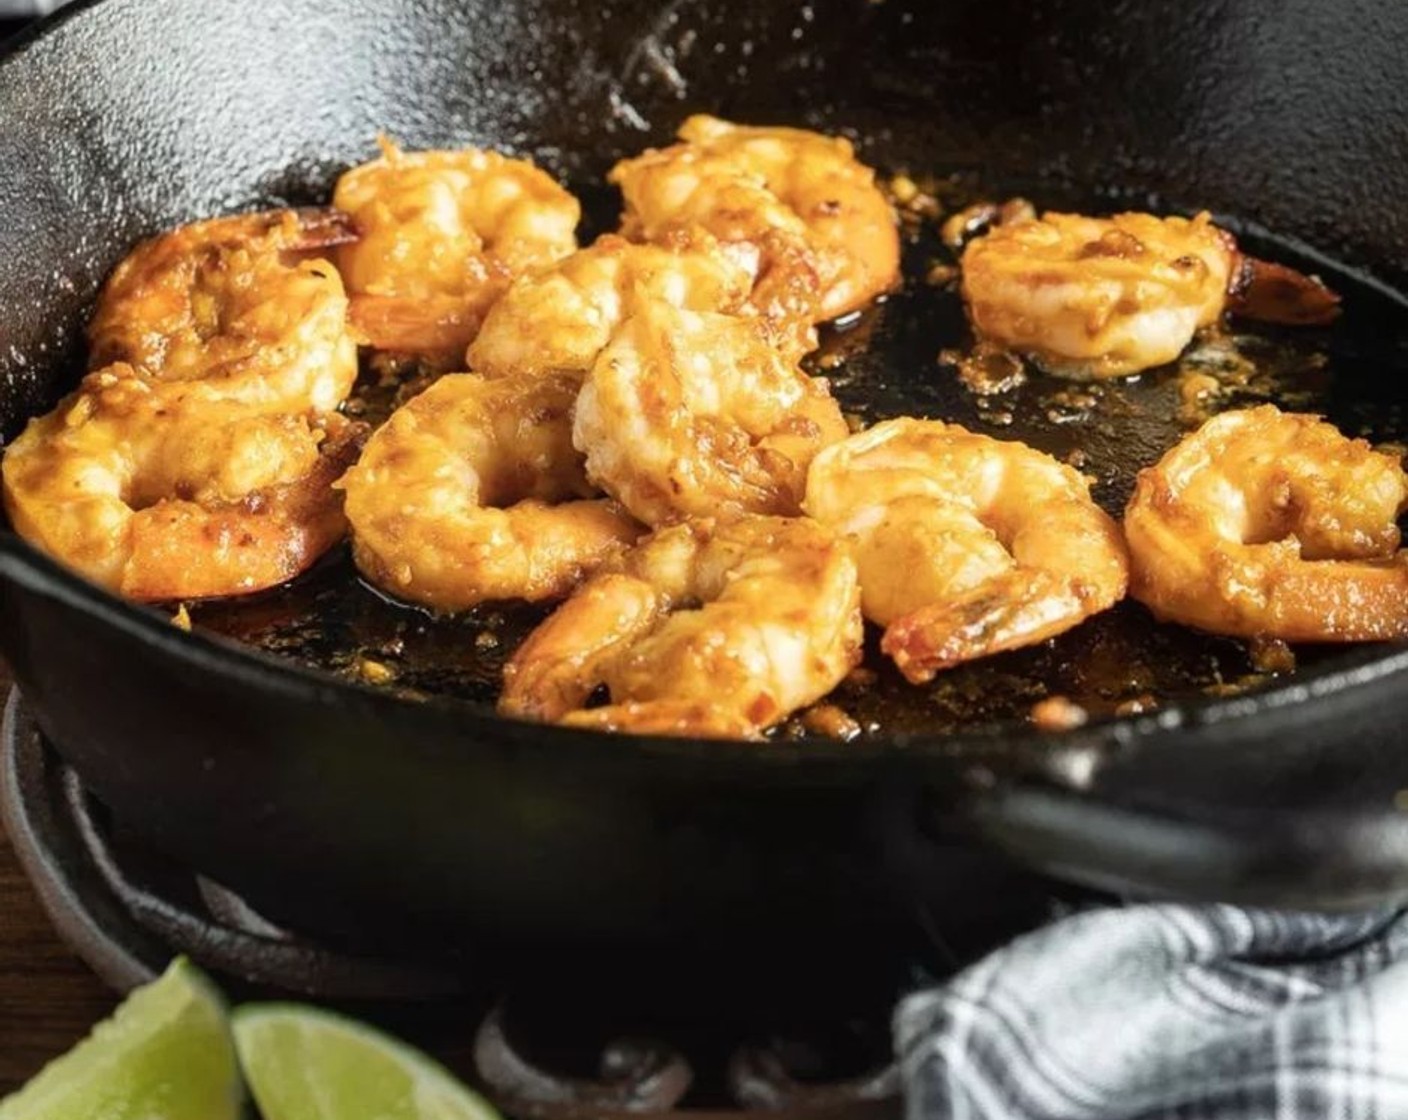 step 4 Heat a large skillet over medium-high heat and add Canola Oil (1/2 Tbsp). Once hot, add shrimp and cook in a single layer. Cook for about 2-2 1/2 minutes per side, until the paste starts to caramelize and stick to the shrimp.